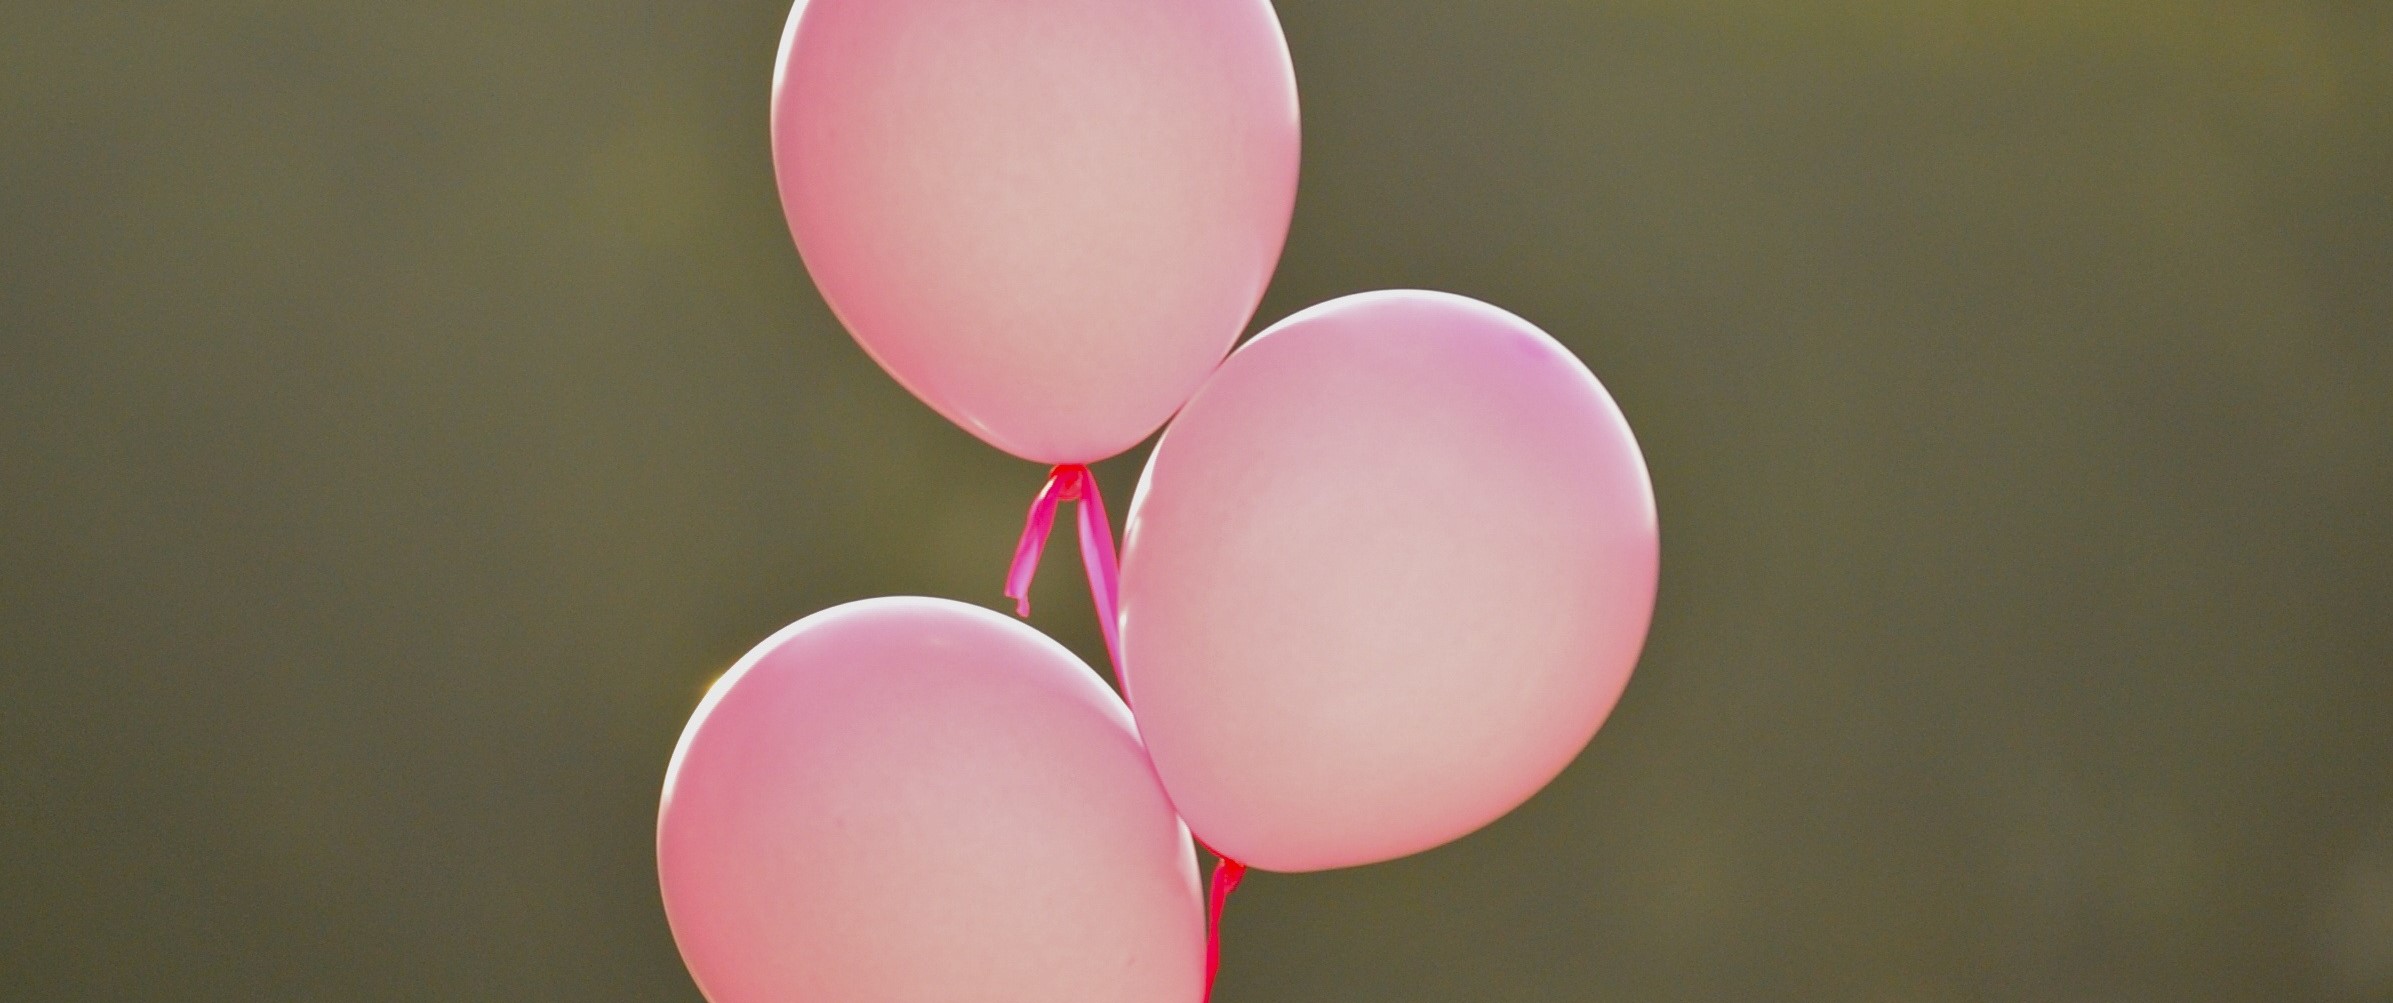 Pink Balloon in Newport News - Quick Donation Process - Old Car in Mississippi - CarDonations4Cancer.org